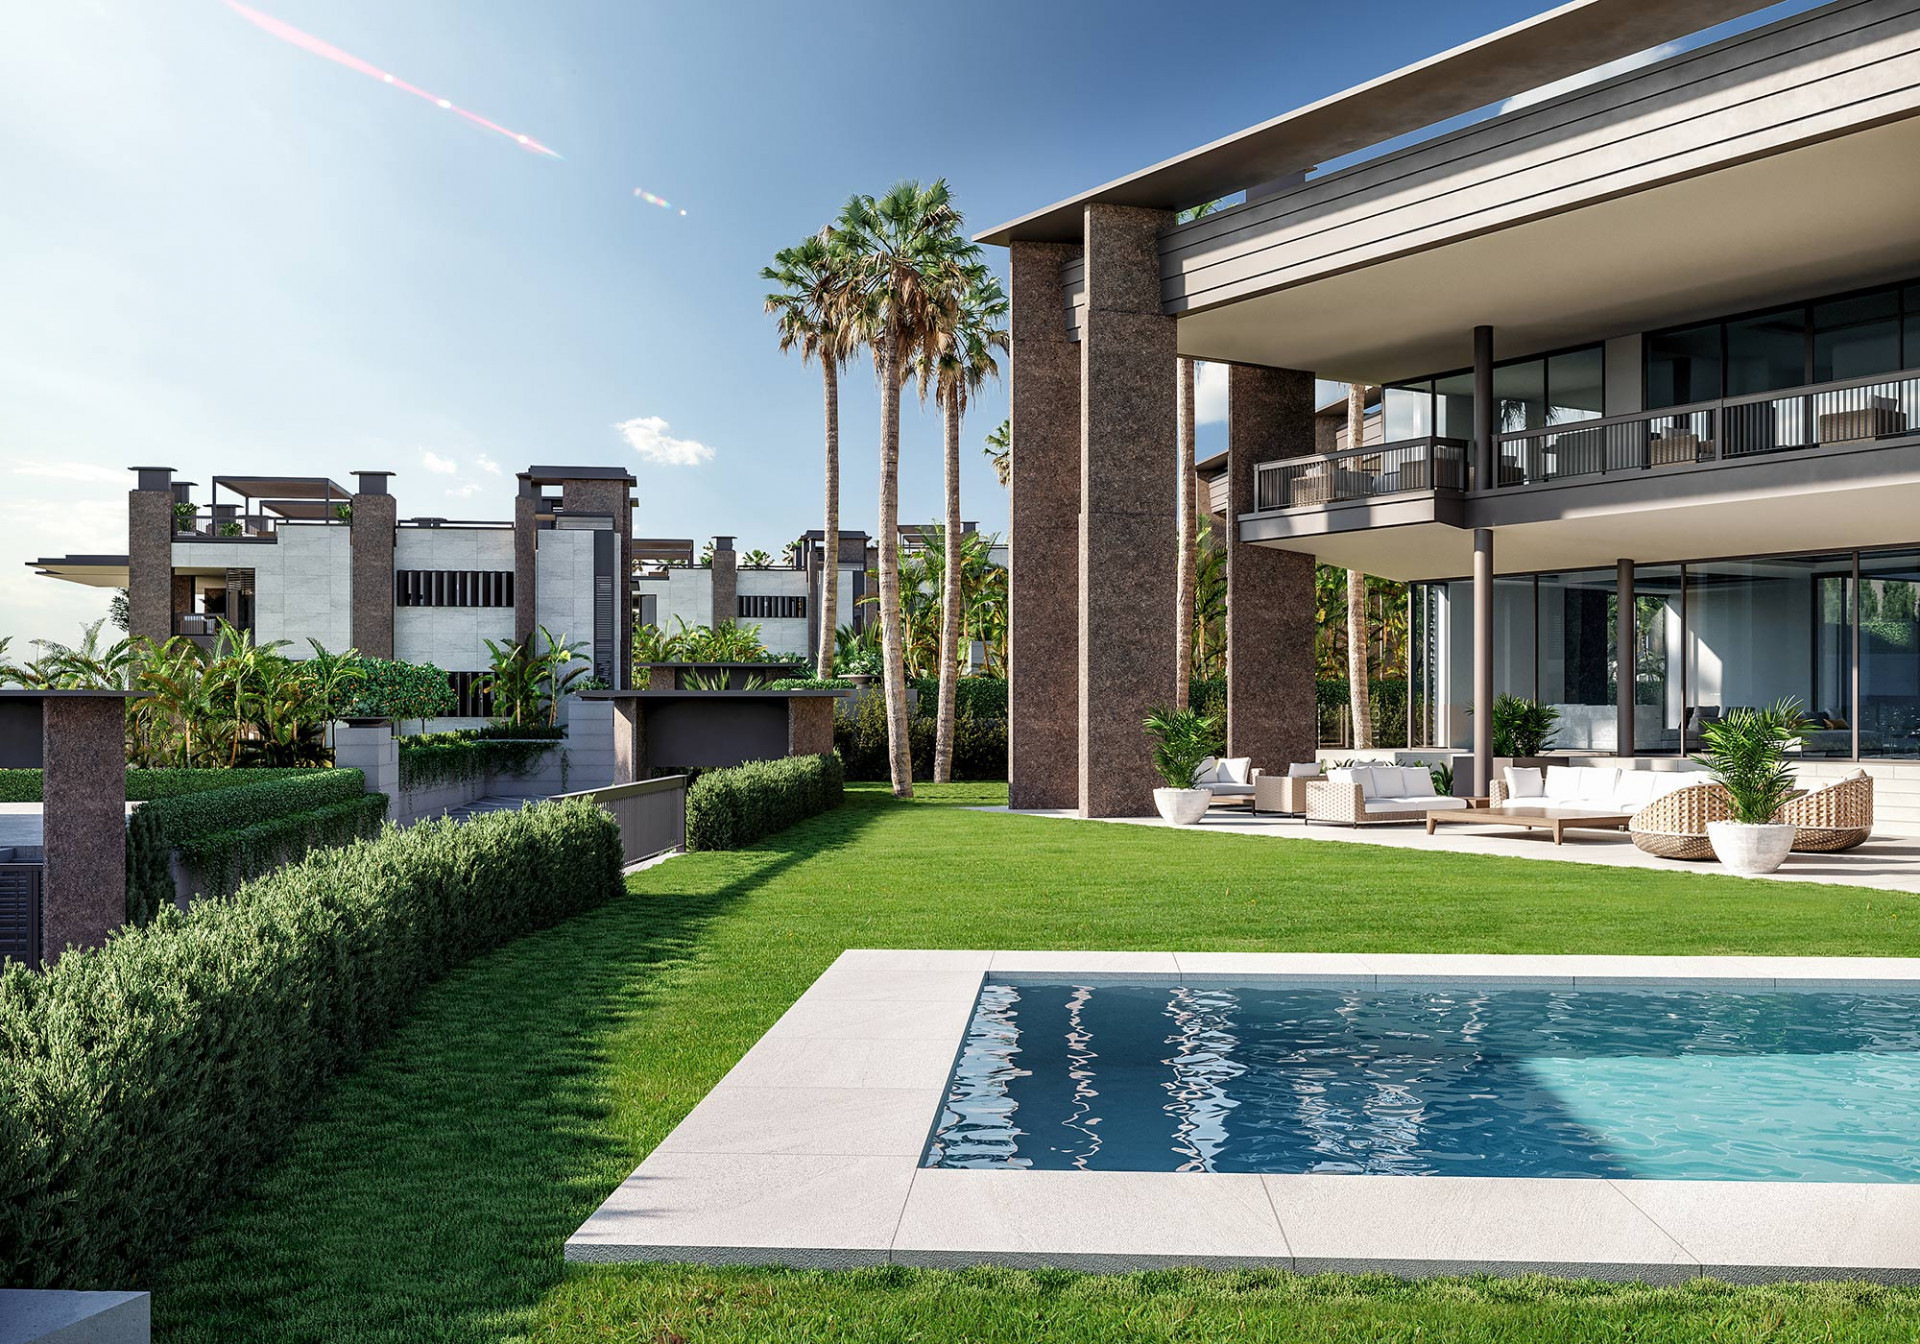 Palacetes de Banús: New luxury residential complex with panoramic views of the Mediterranean Sea, Puerto Banus and the mountains. | Image 8